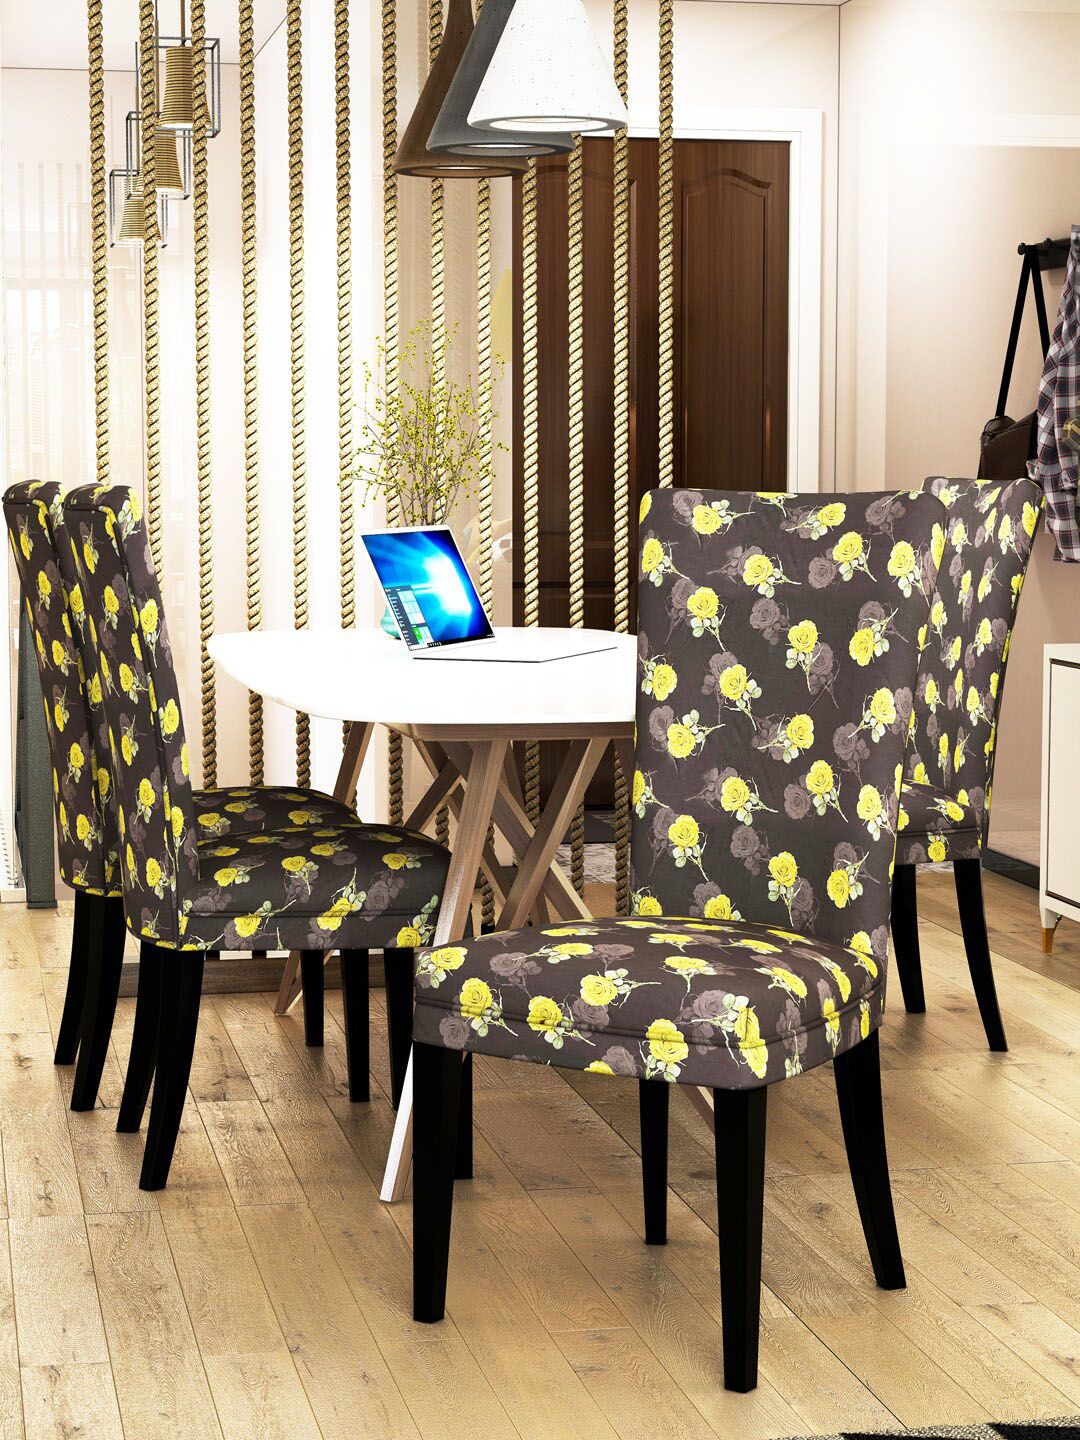 Nendle Set Of 4 Black and Yellow Floral Printed Chair Covers Price in India